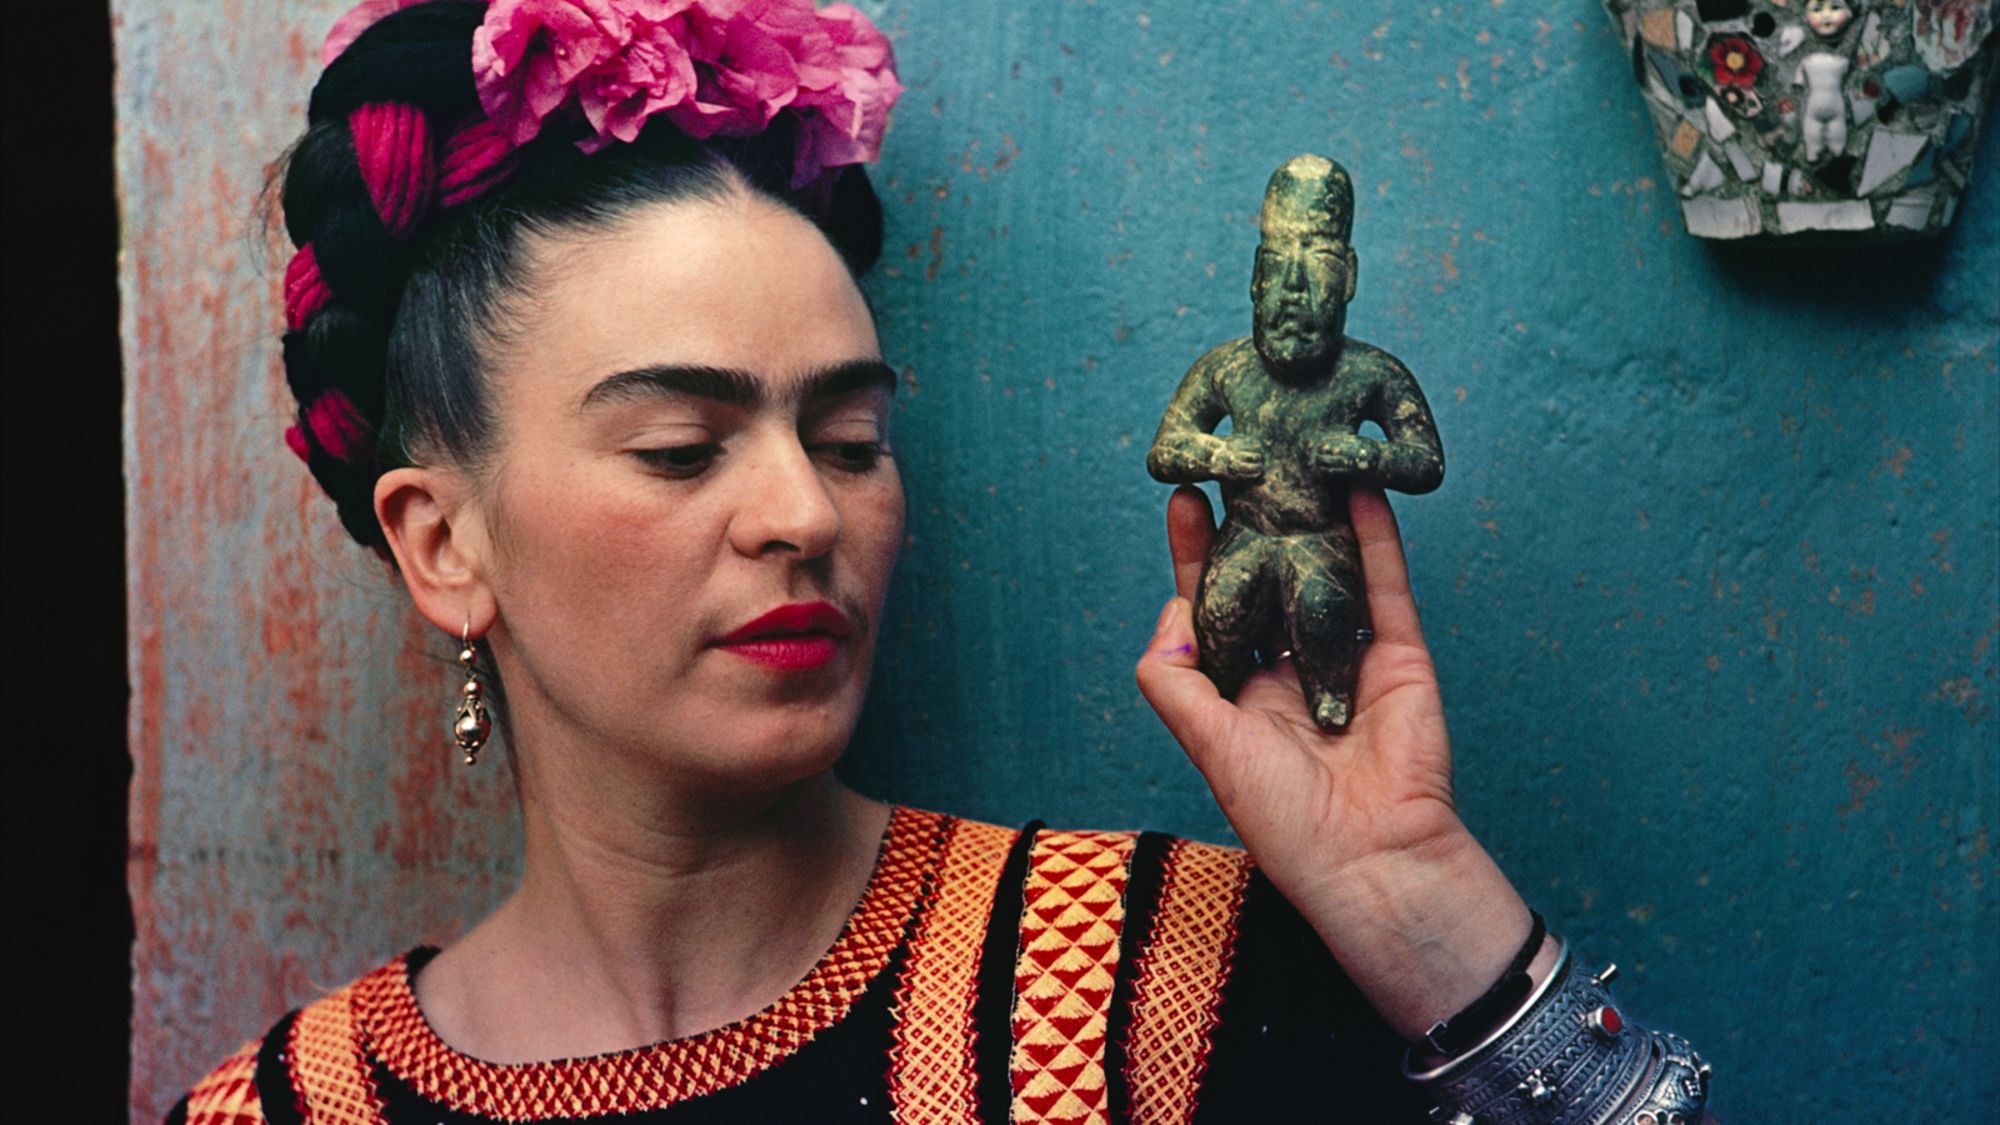 Frida Kahlo: 5 things to know about the Mexican artist